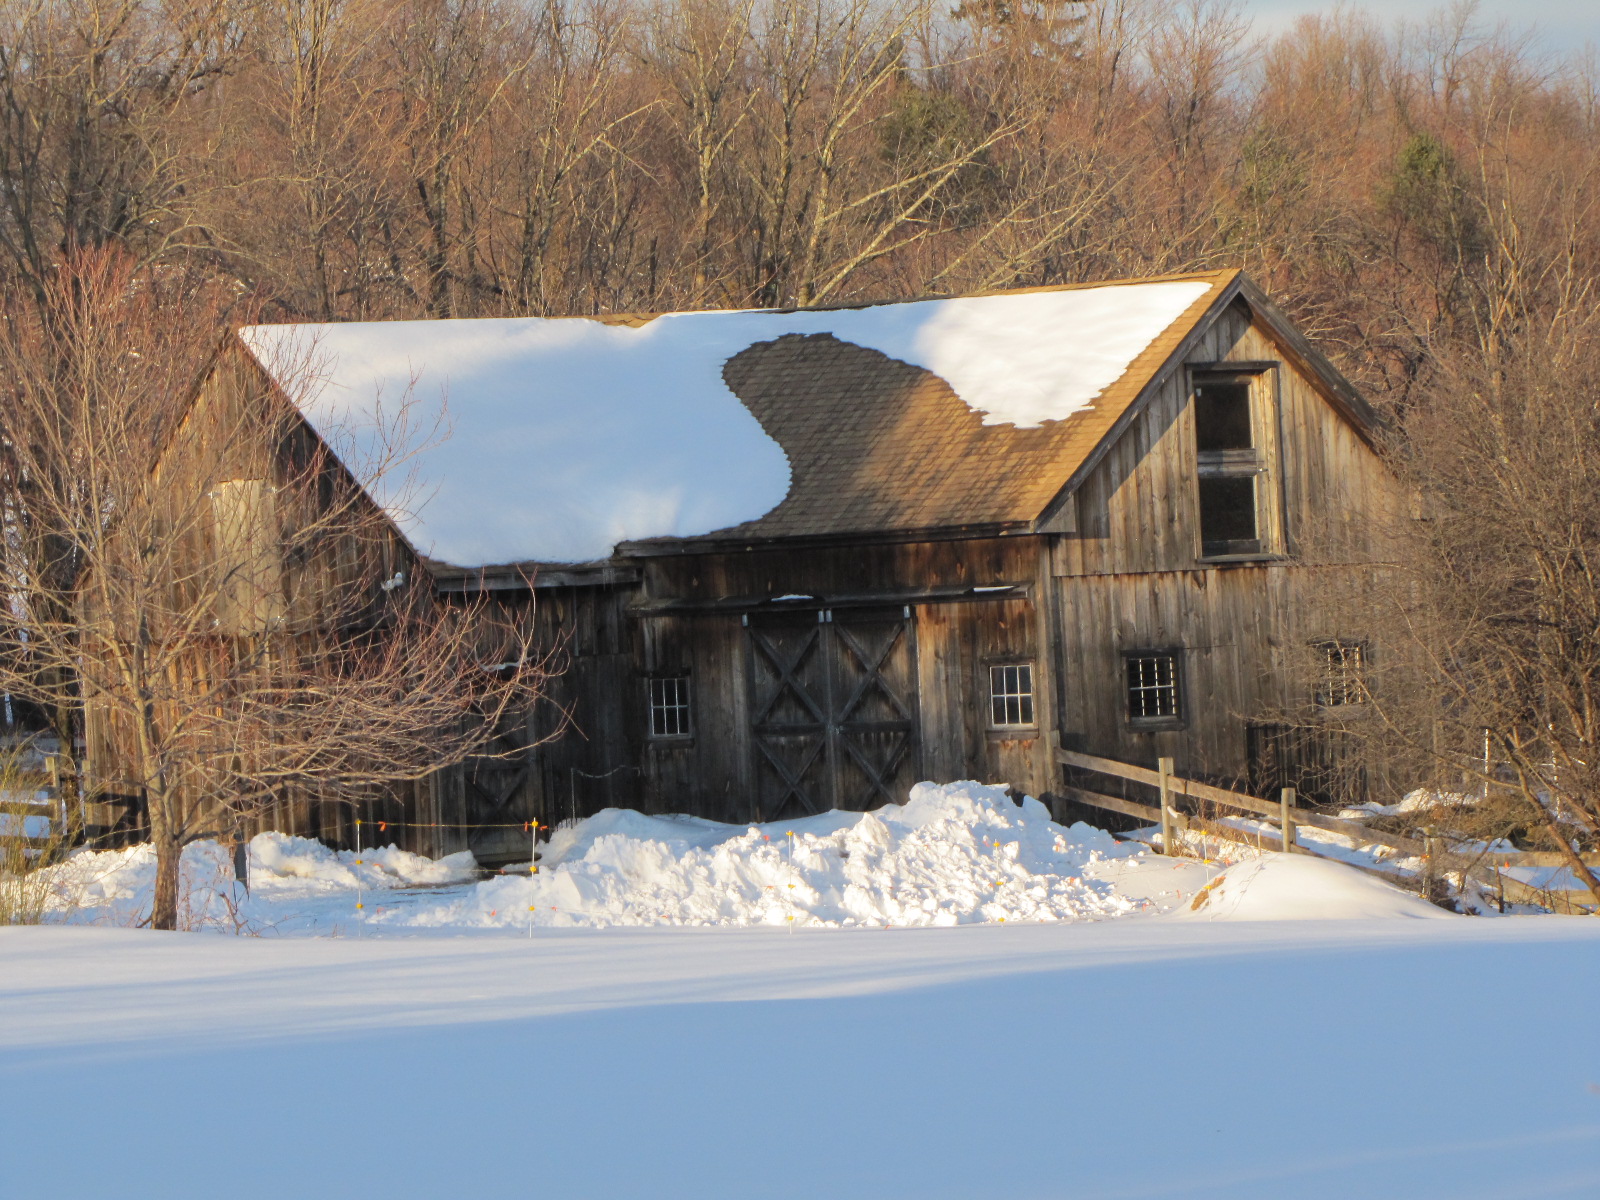 Barn Of Yesteryear (user submitted)